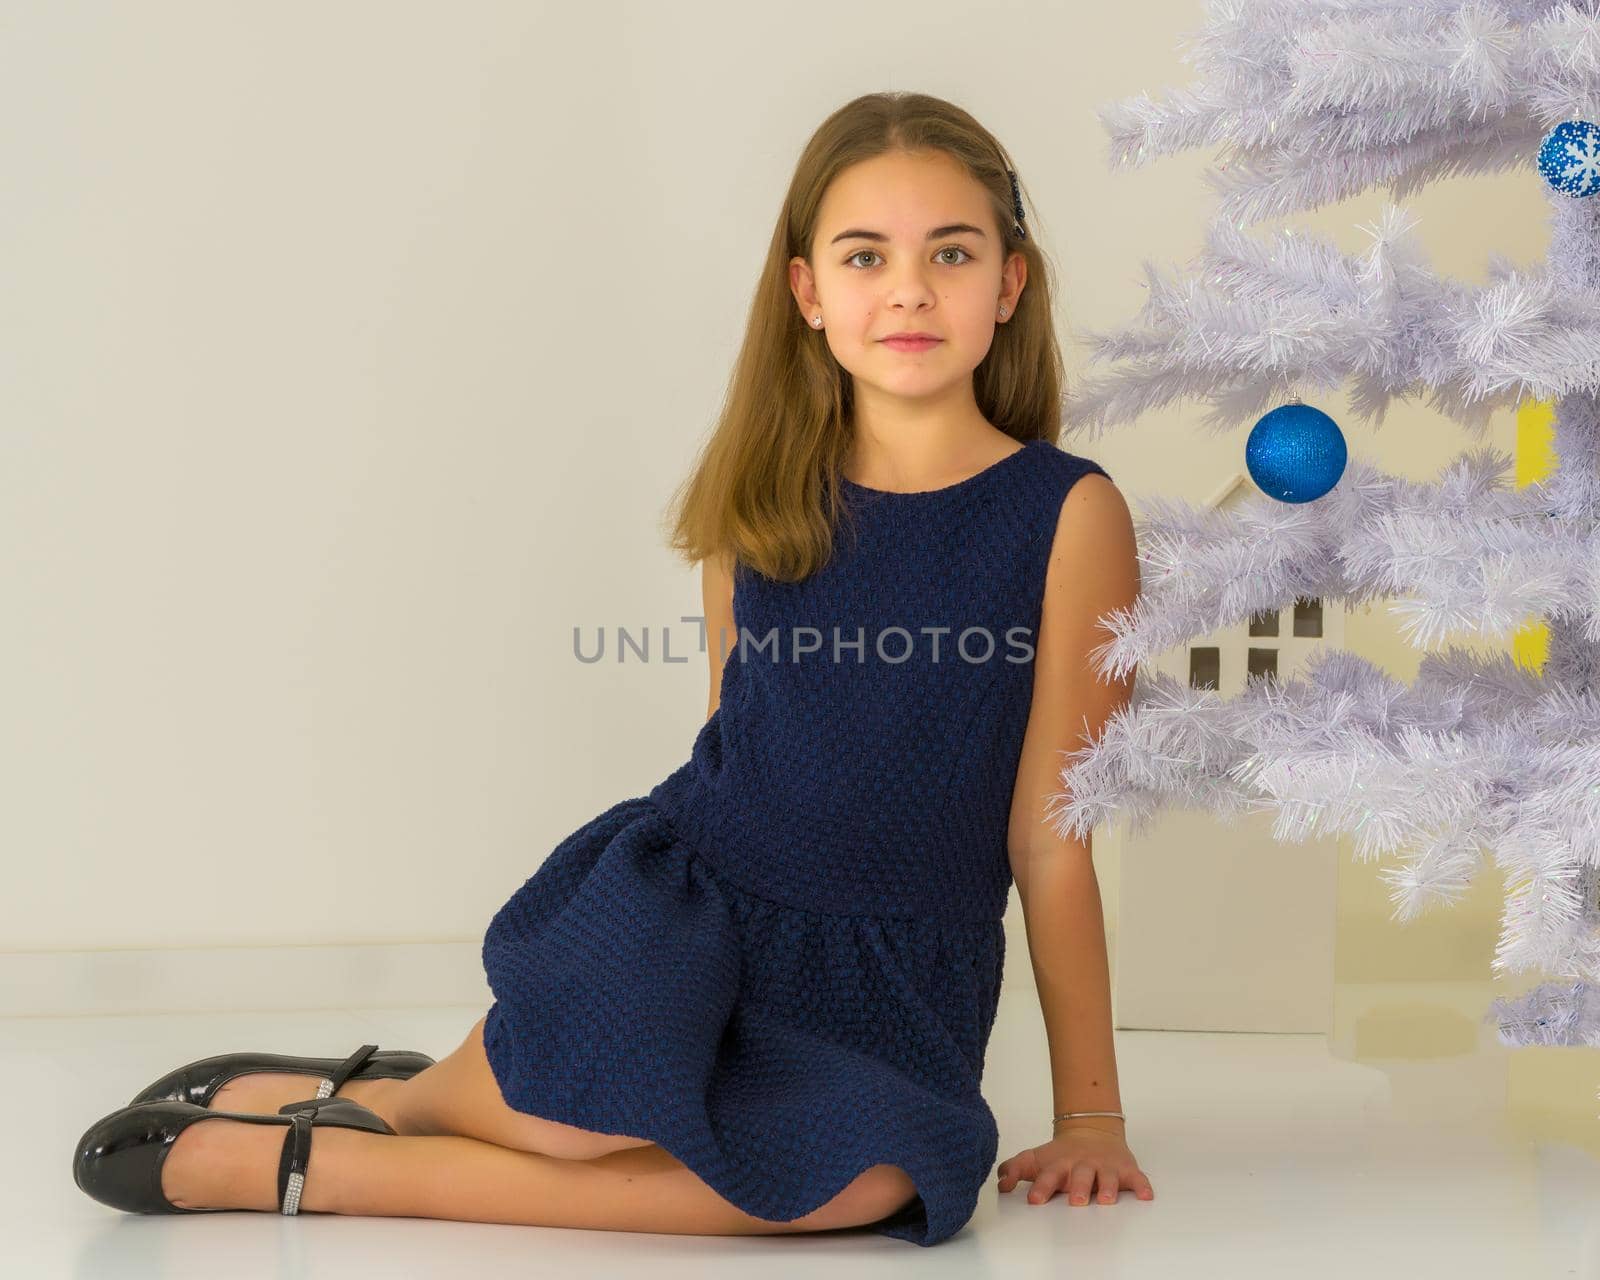 Beautiful Blonde Girl Wearing Stylish Dress Sitting on the Floor in Front of Decorated White Christmas Tree, Adorable Girl Celebrating Christmas and New Year Smiling at Camera